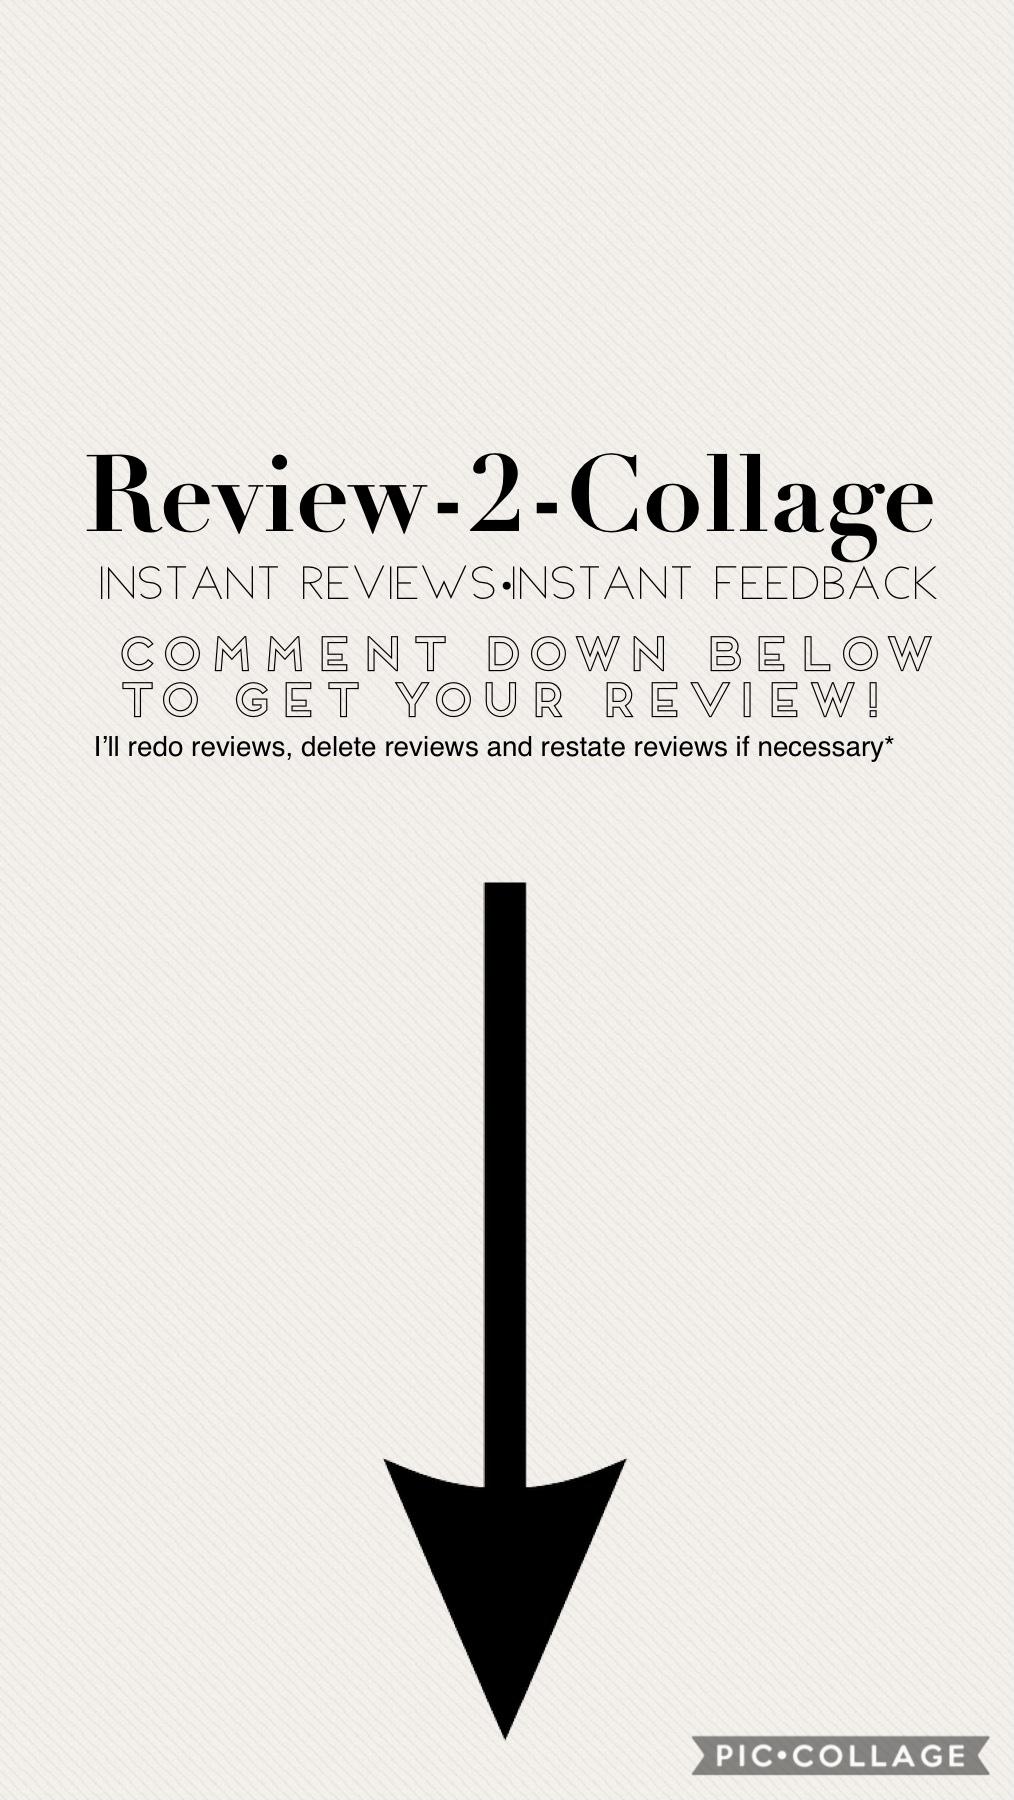 Review-2-Collage! 